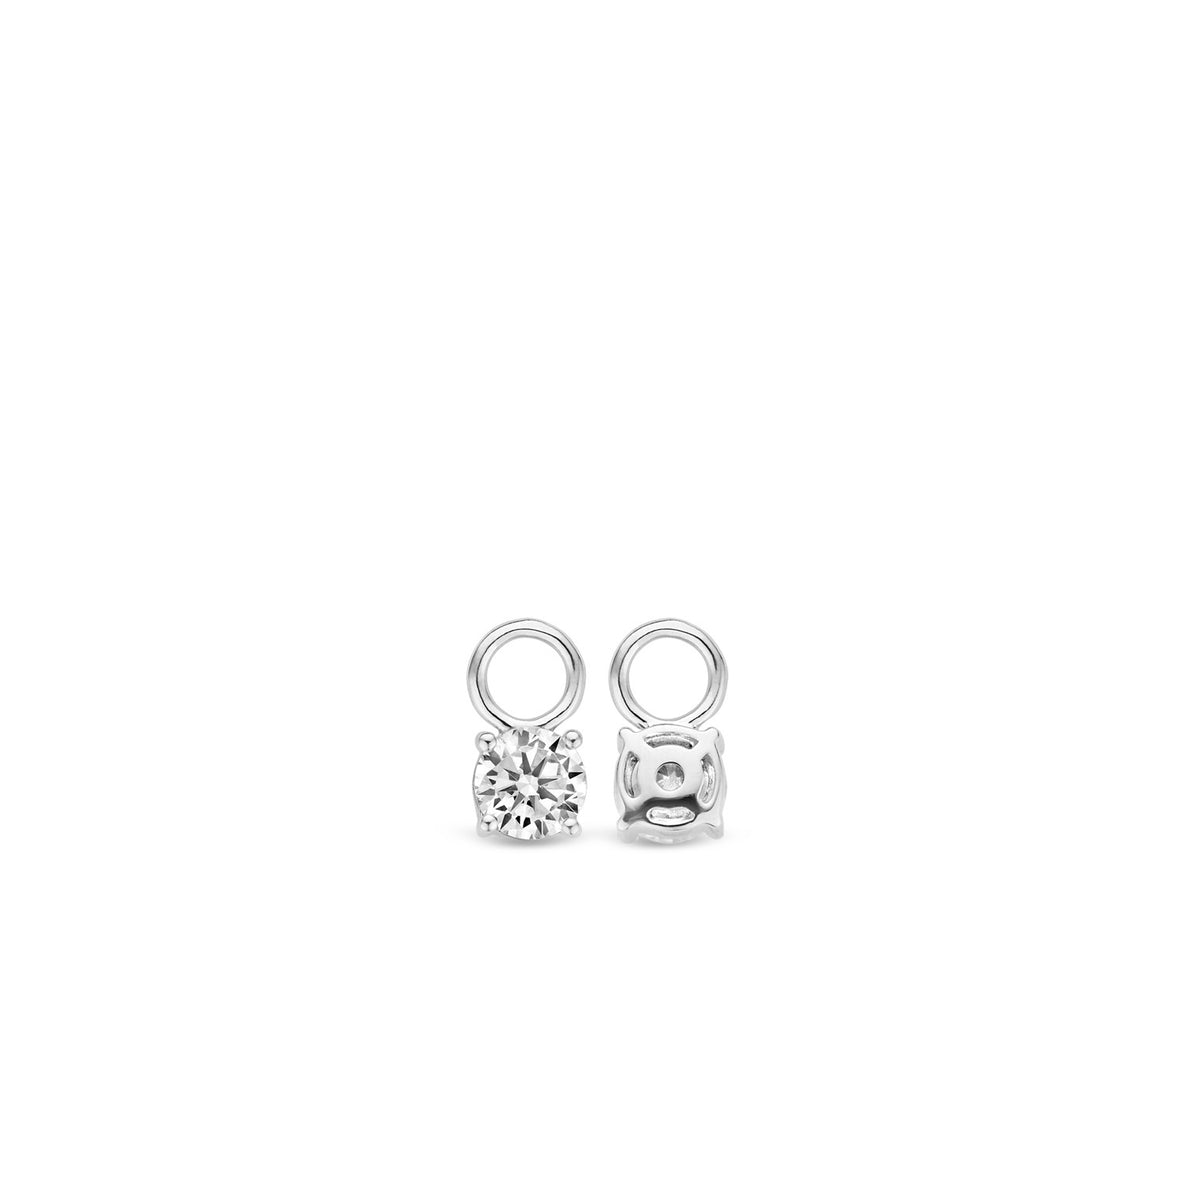 TI SENTO Sterling Silver Four Prong Cubic Zirconia Ear Charms